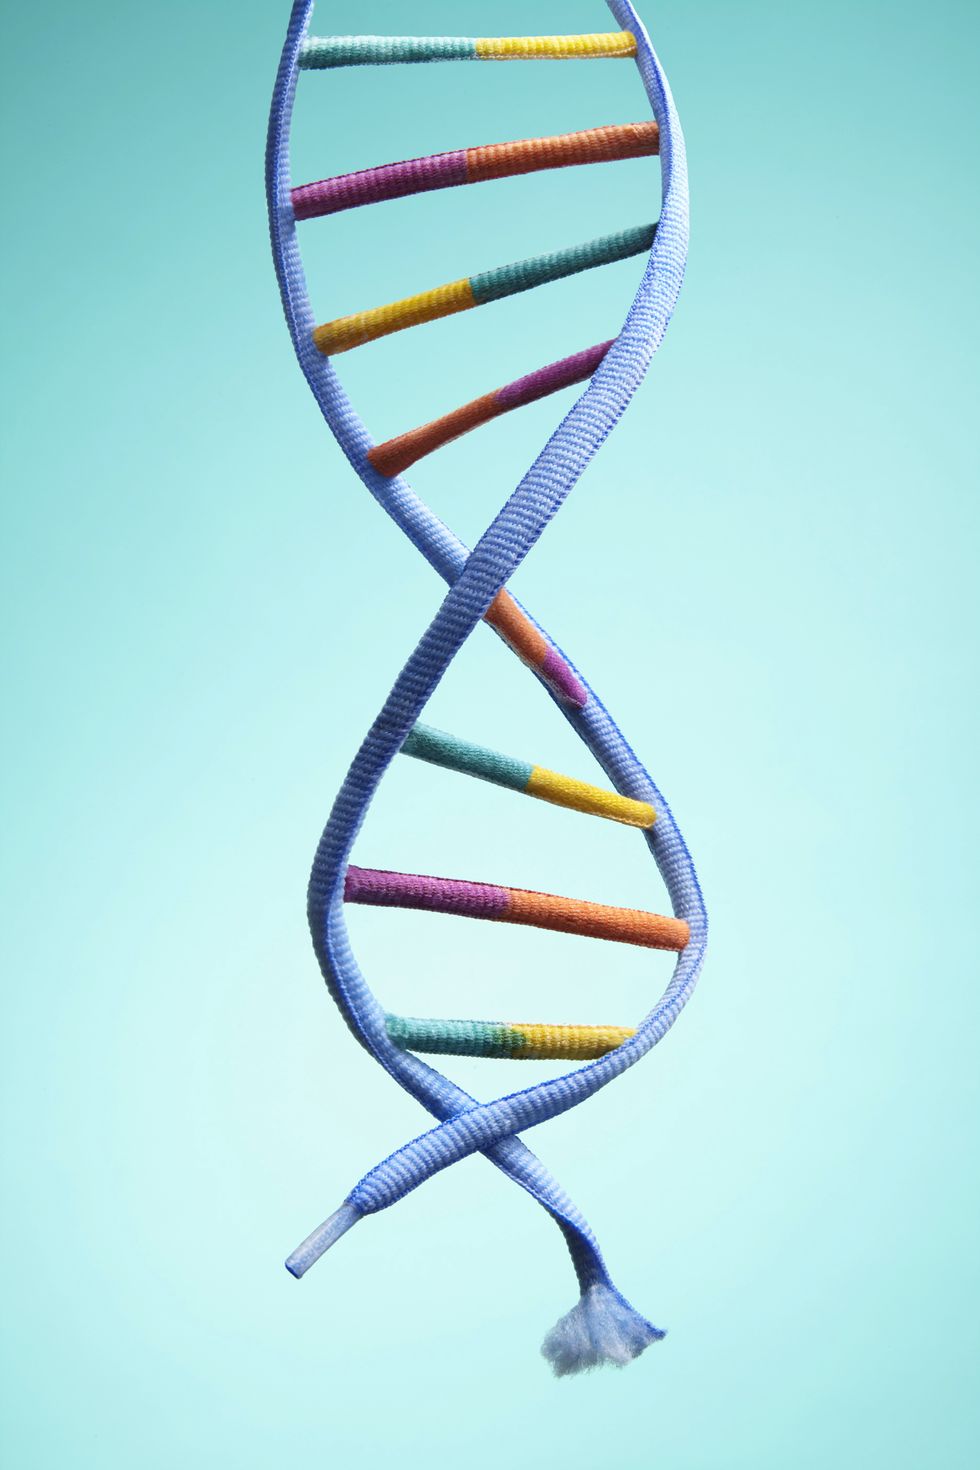 aging dna